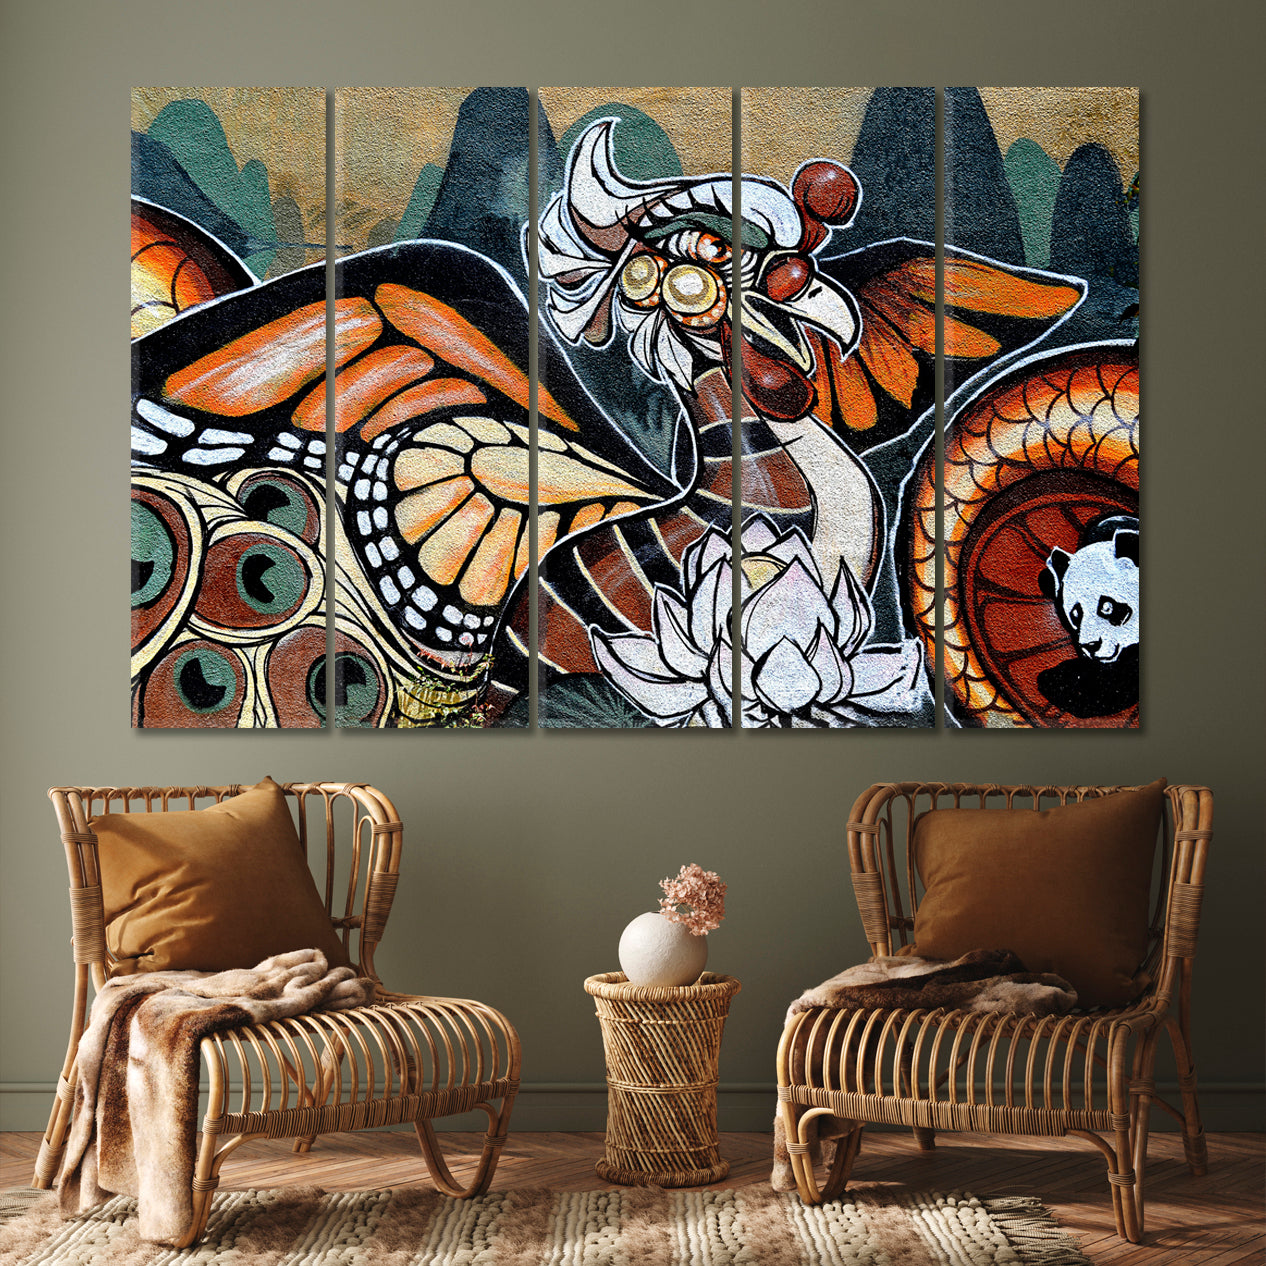 Colorful Graffiti Street Art Abstract Contemporary Abstract Art Print Artesty 5 panels 36" x 24" 